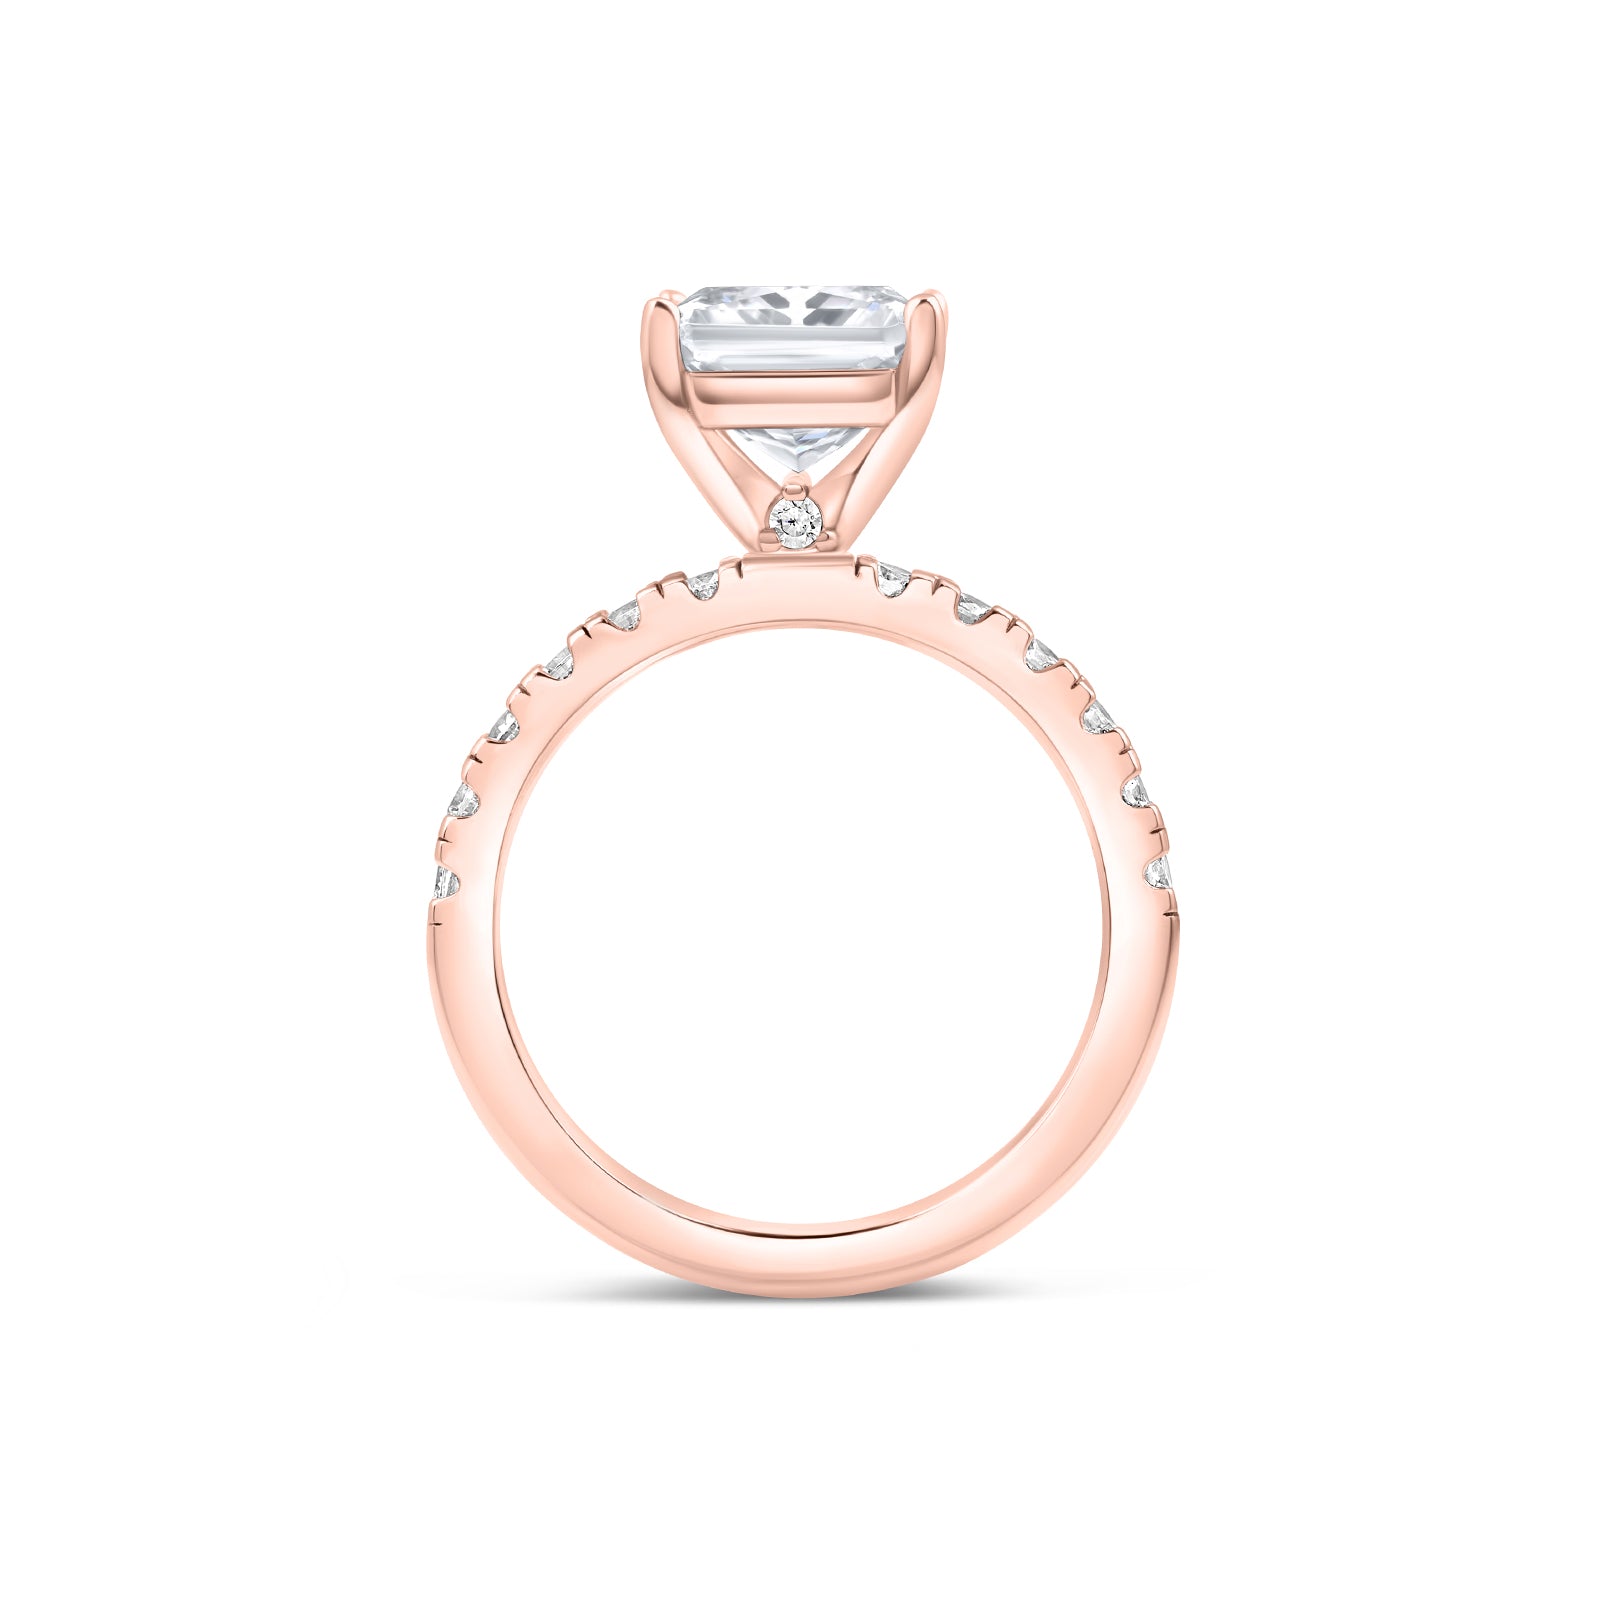 Band view of sleek rose gold radiant cut engagement ring with dainty stone detailing under its setting and a half eternity band